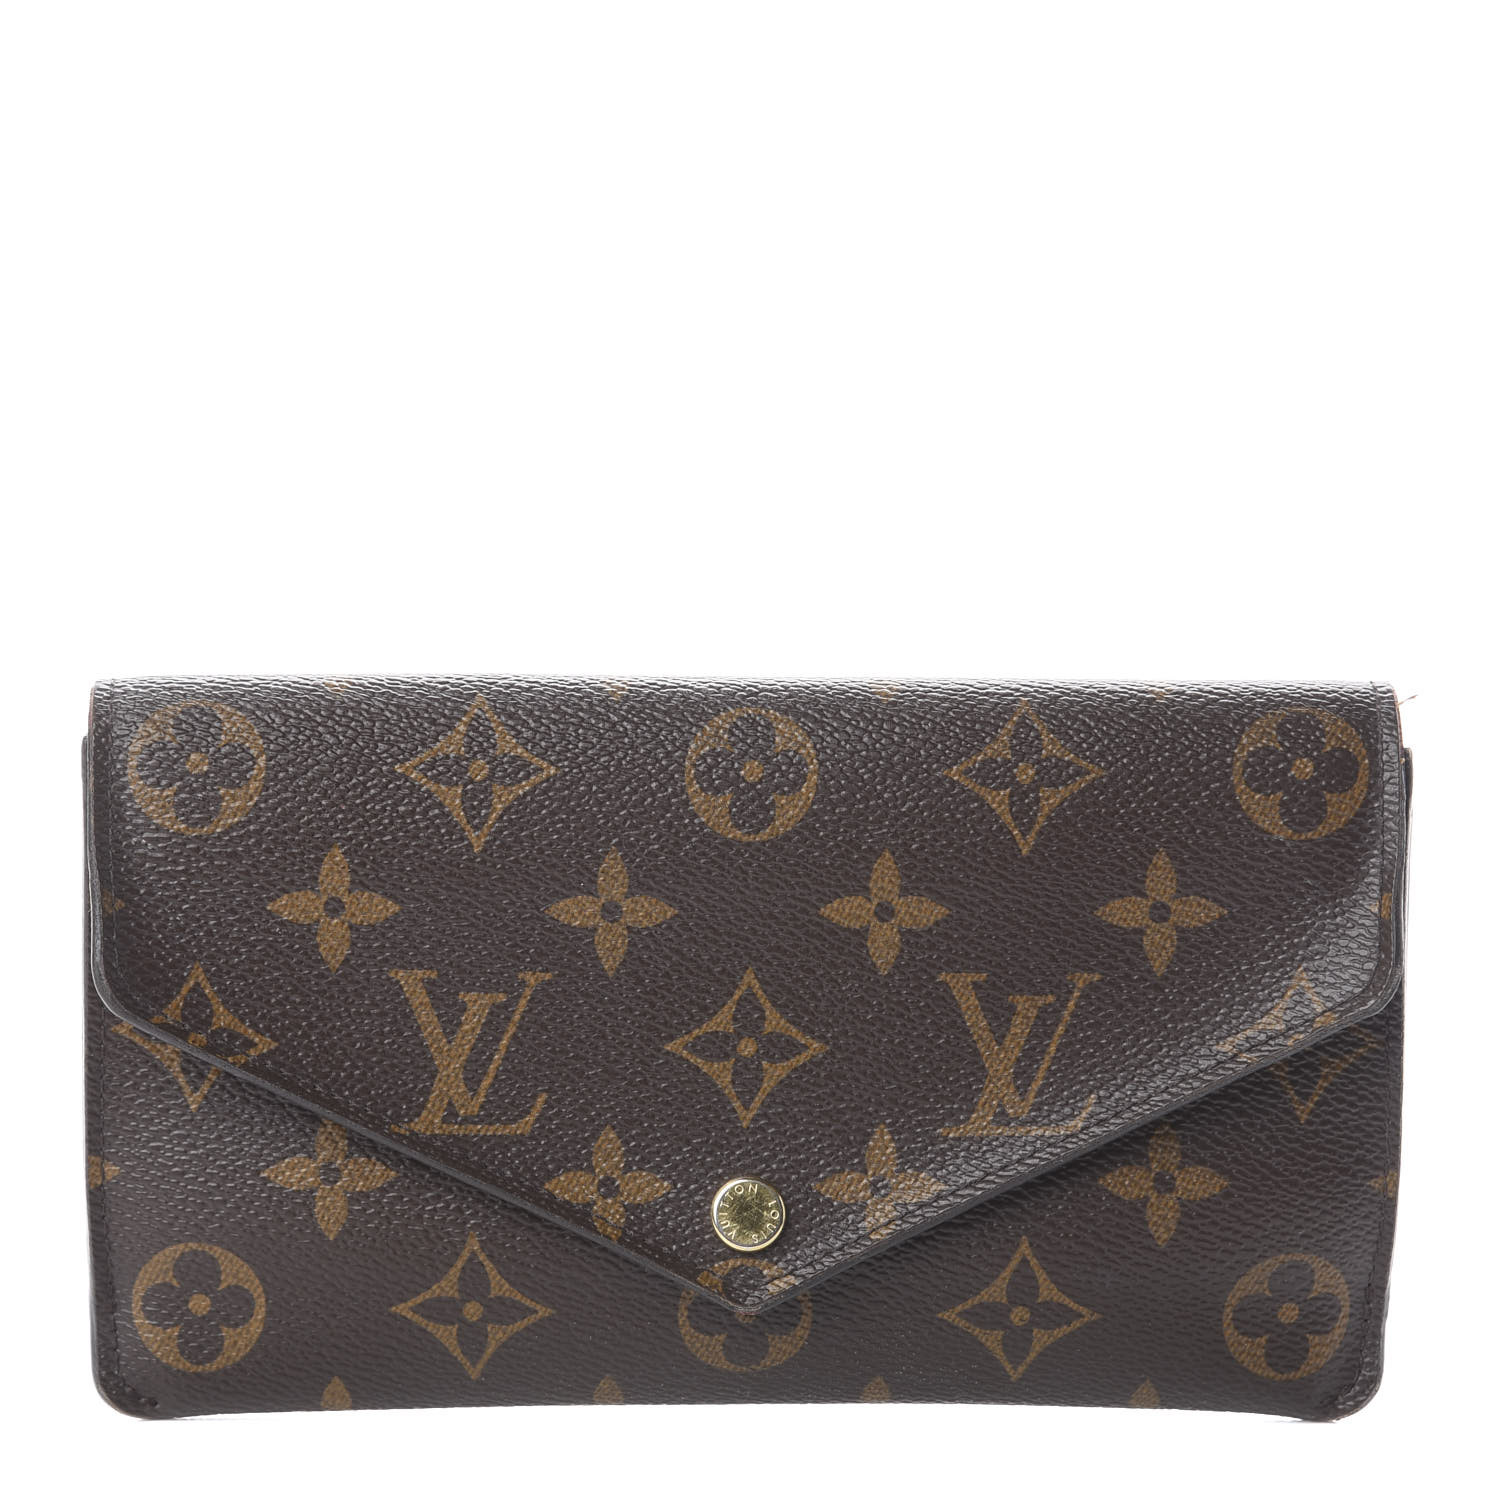 Lv Jeanne Wallet Review  Natural Resource Department